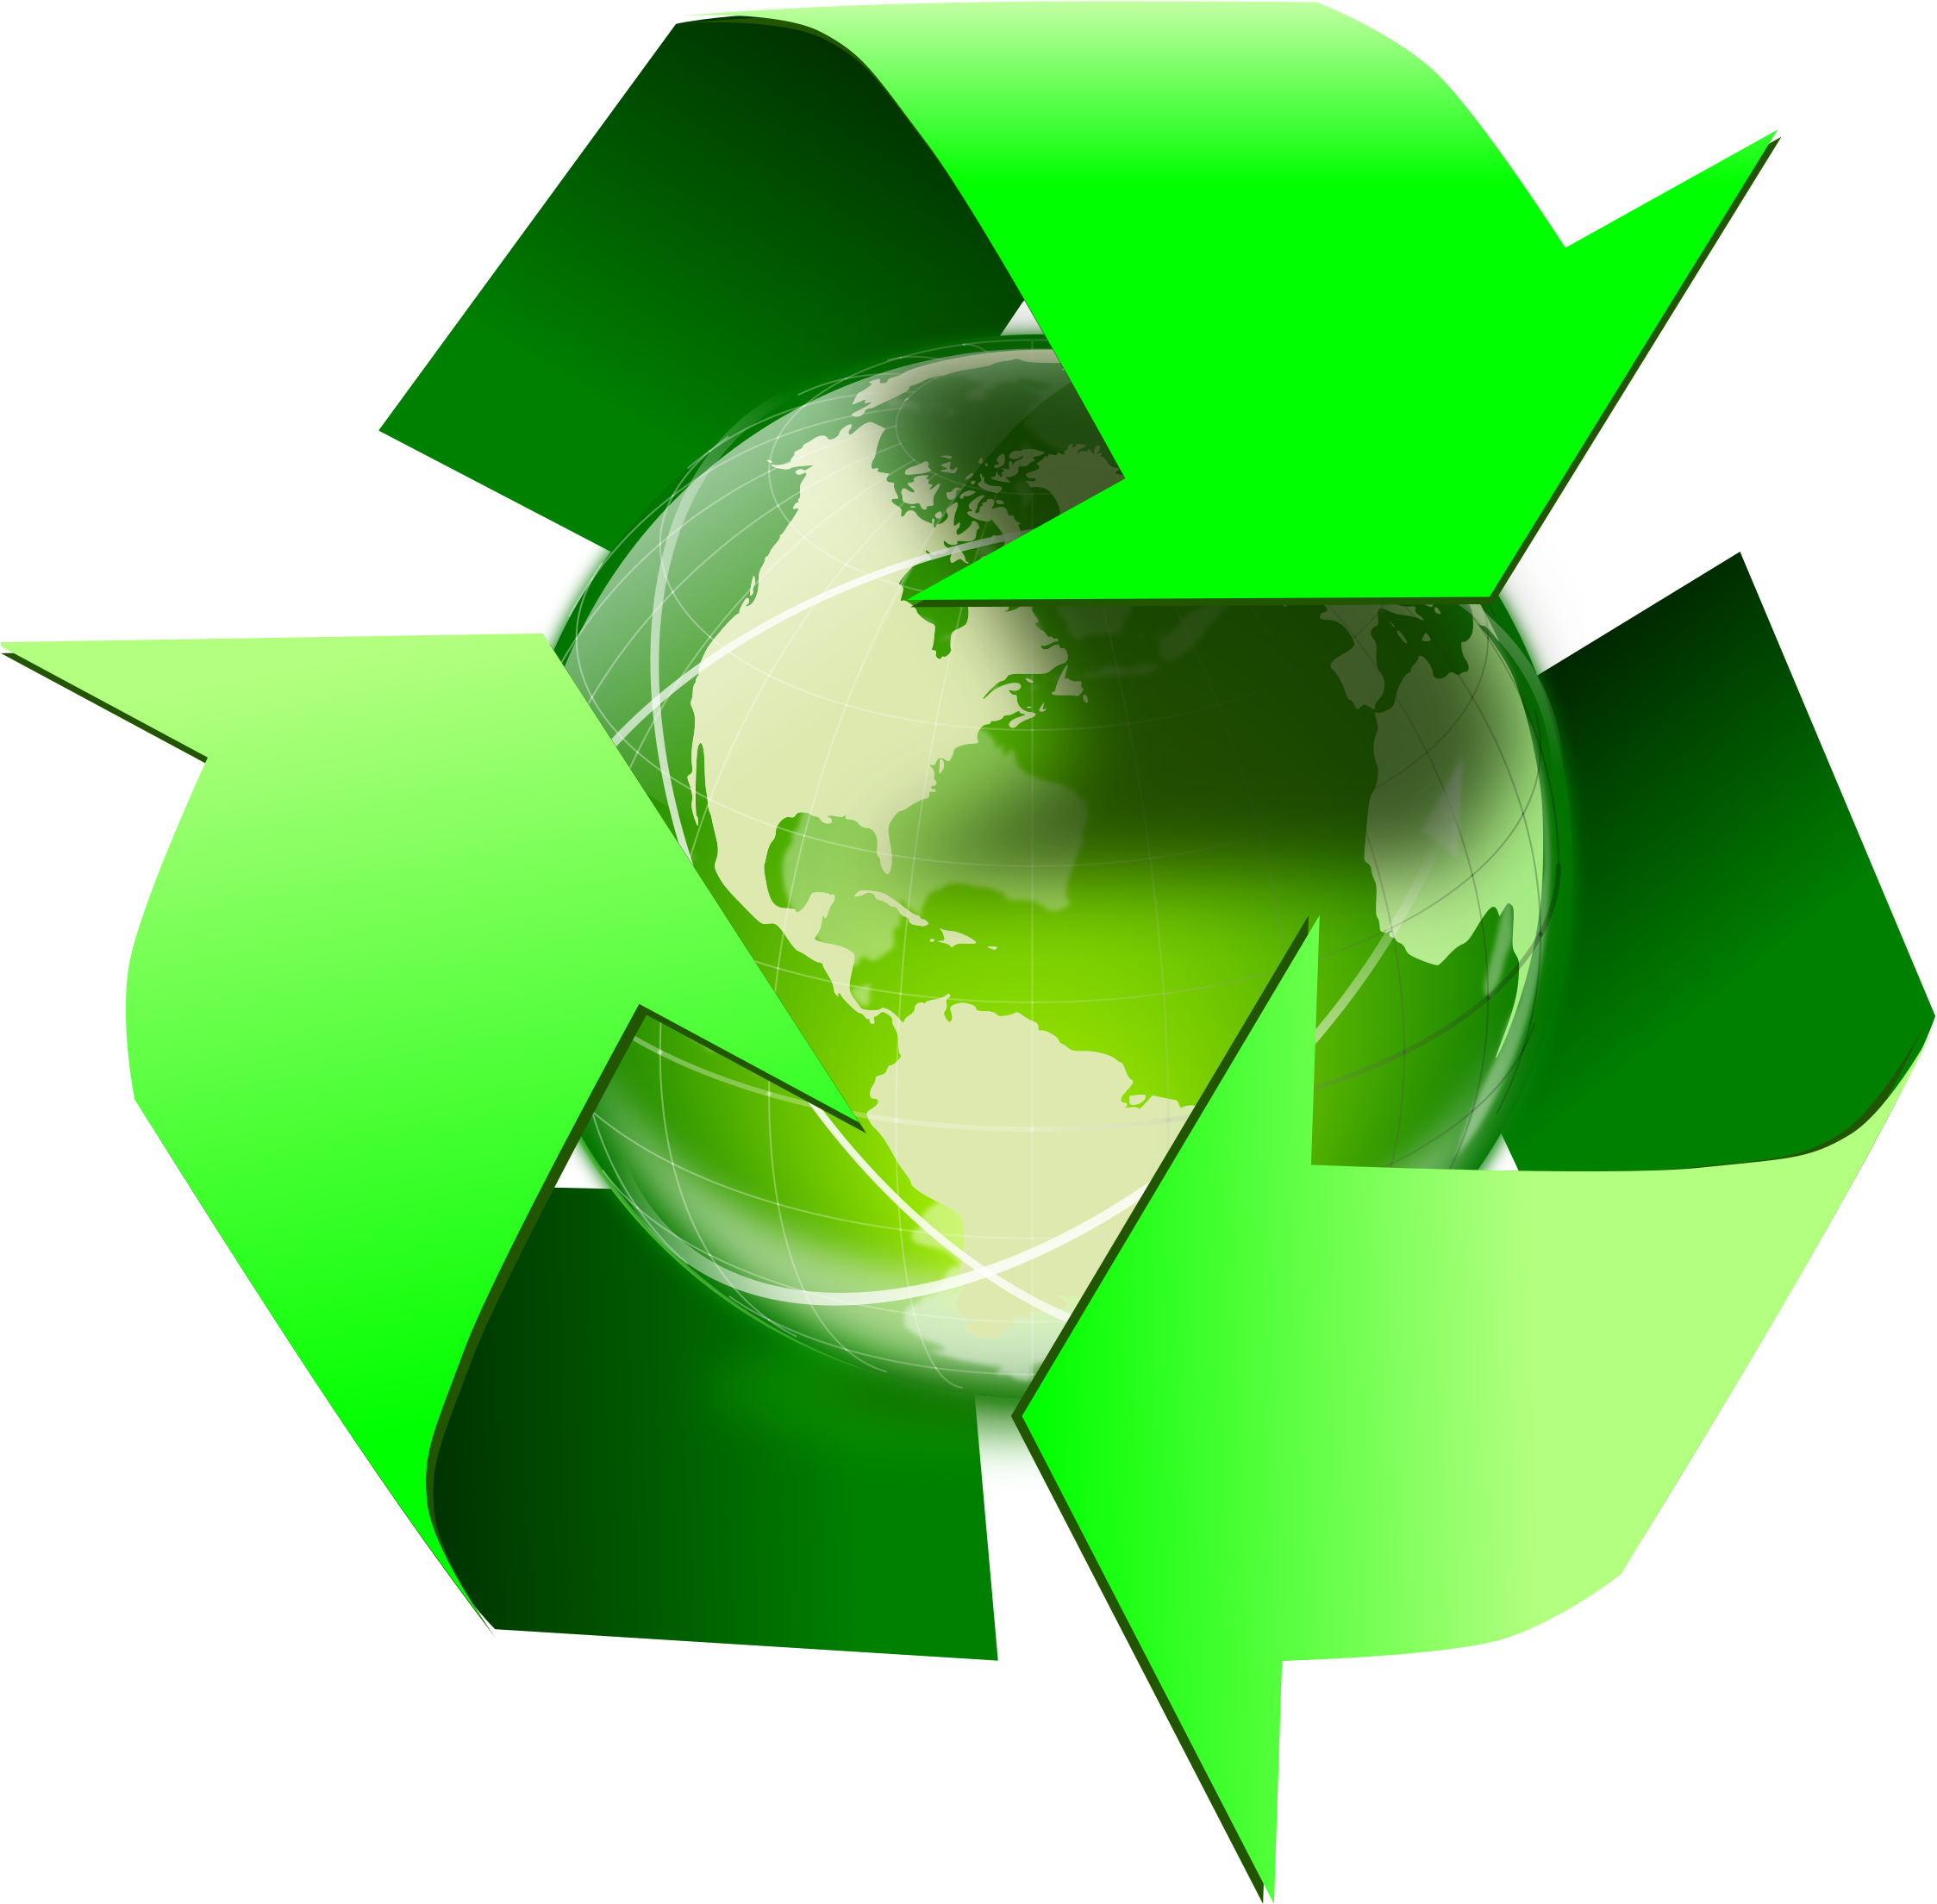 Recycling - Recycle Symbol Animated Gif (2400x2400)